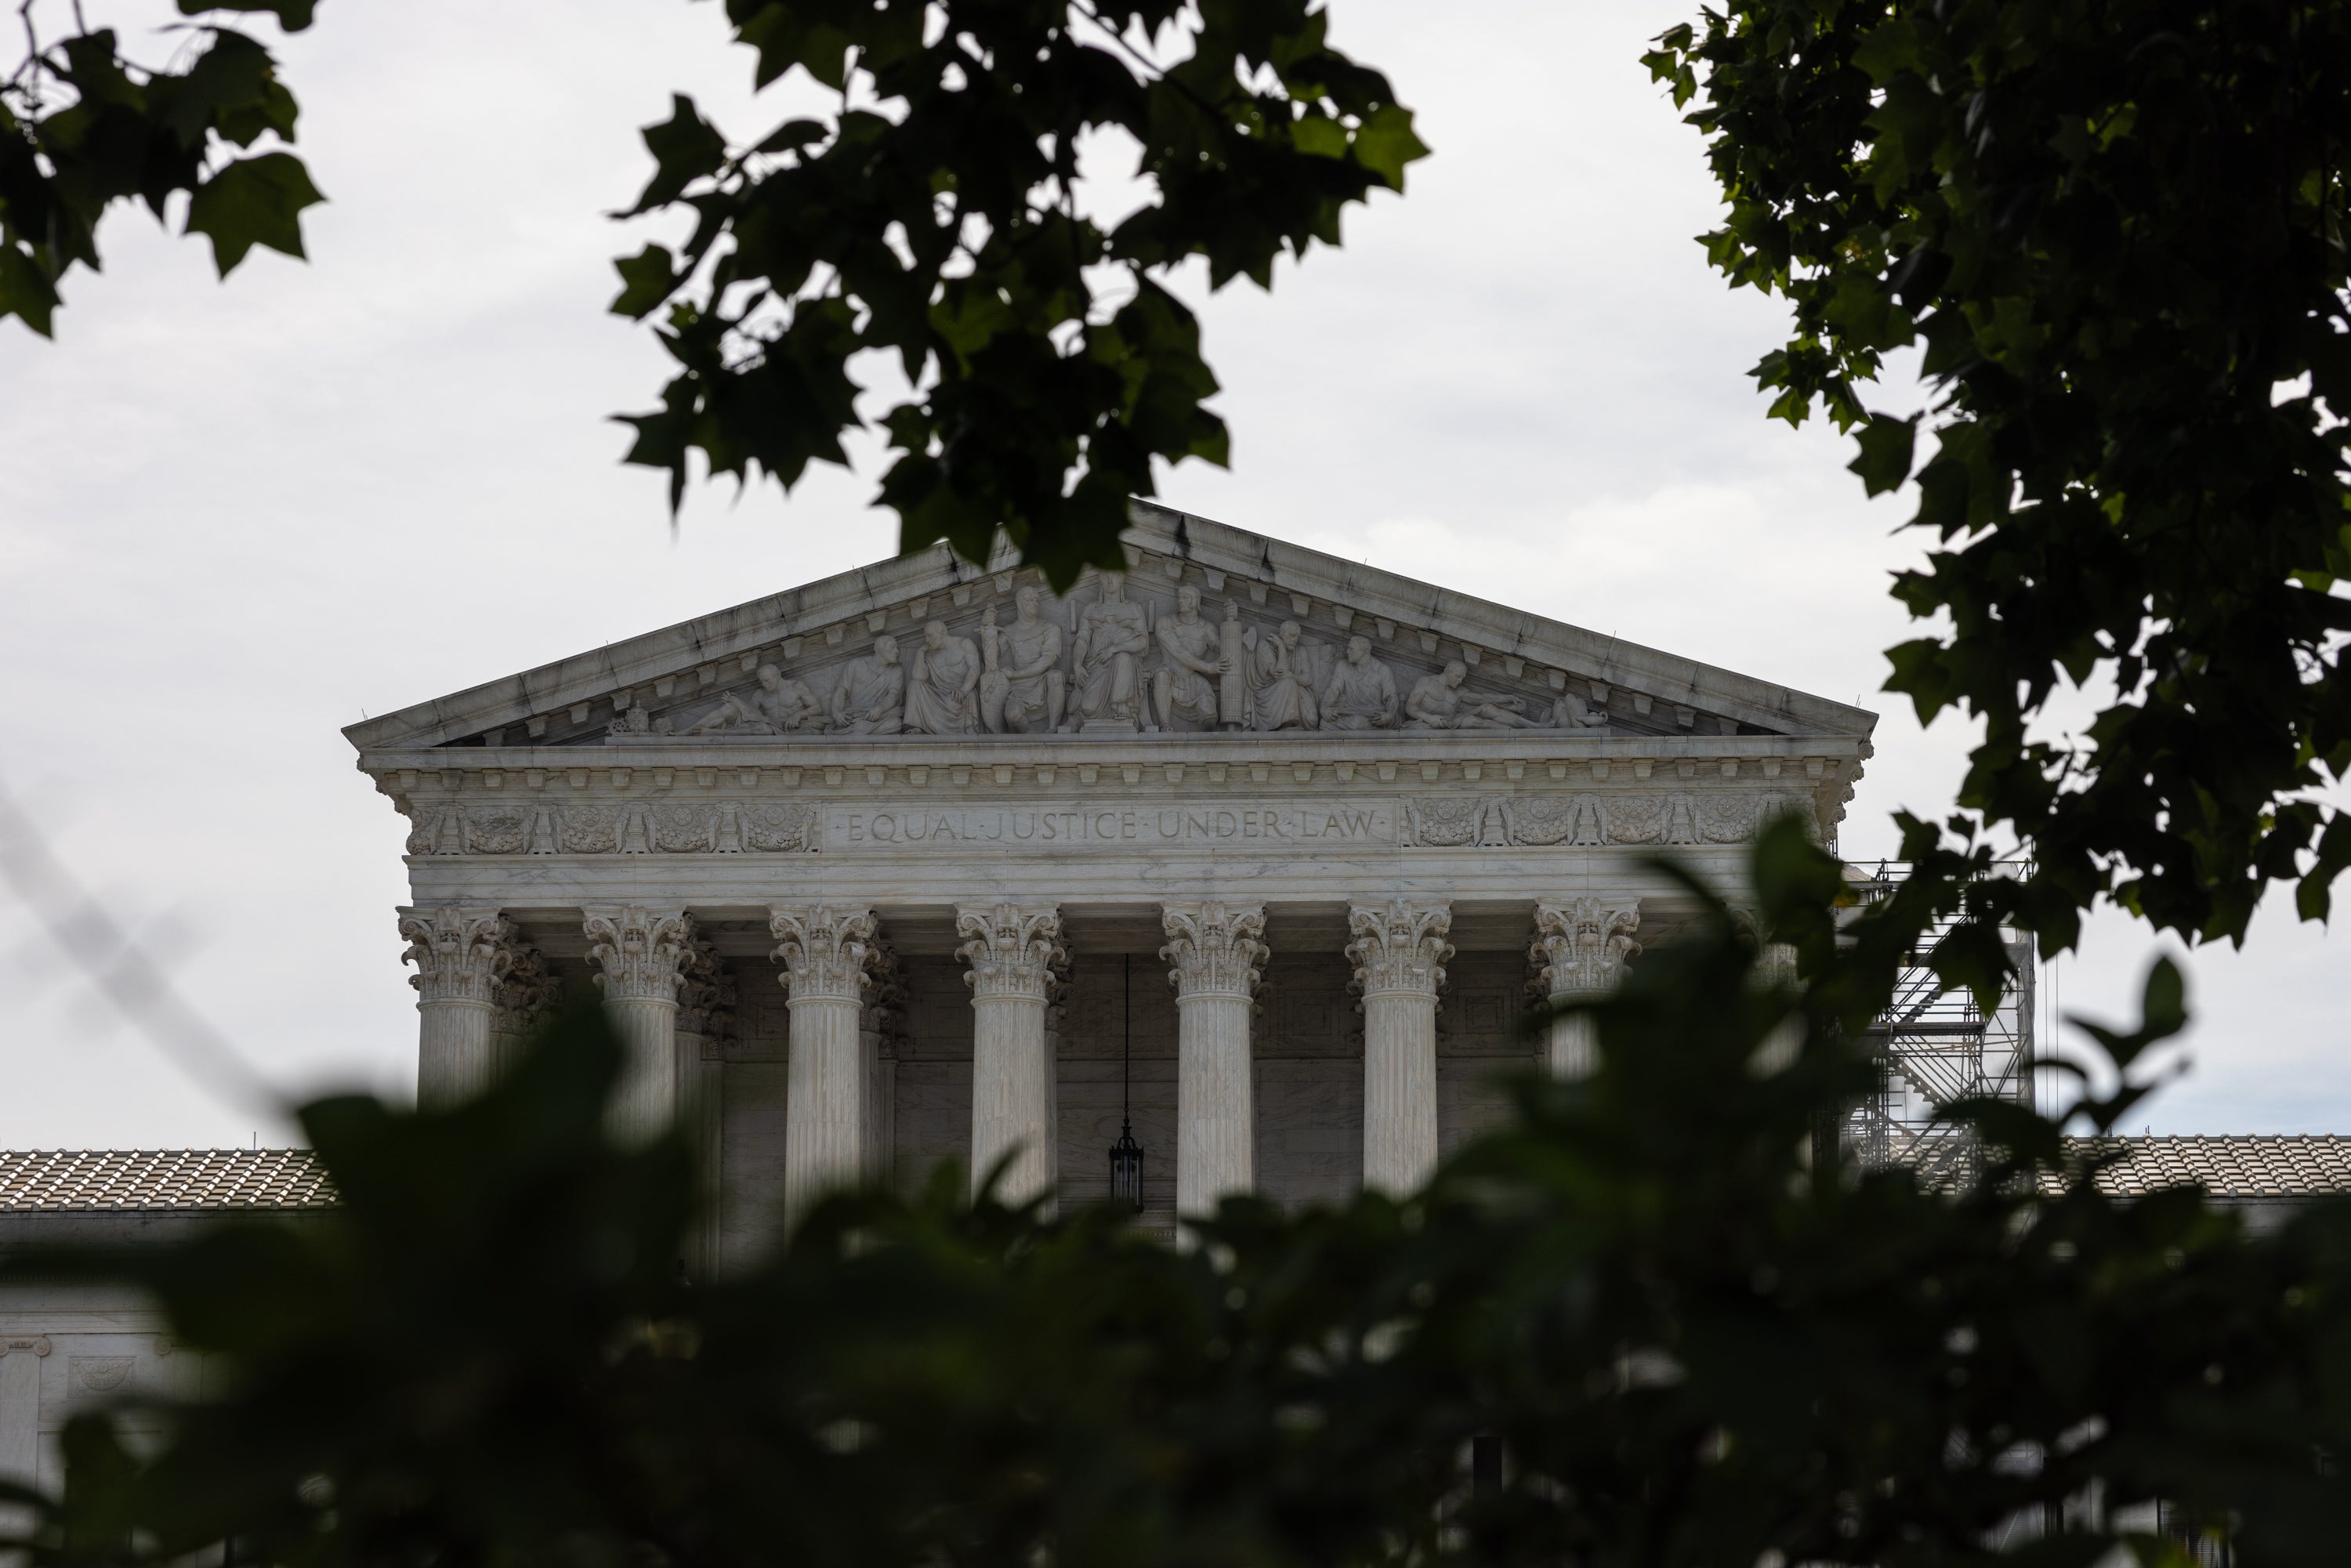 The Supreme Court overturned the Chevon deference - a 40 year precedent - on Friday. The old rule allowed federal agencies oversight and enforcement for decades